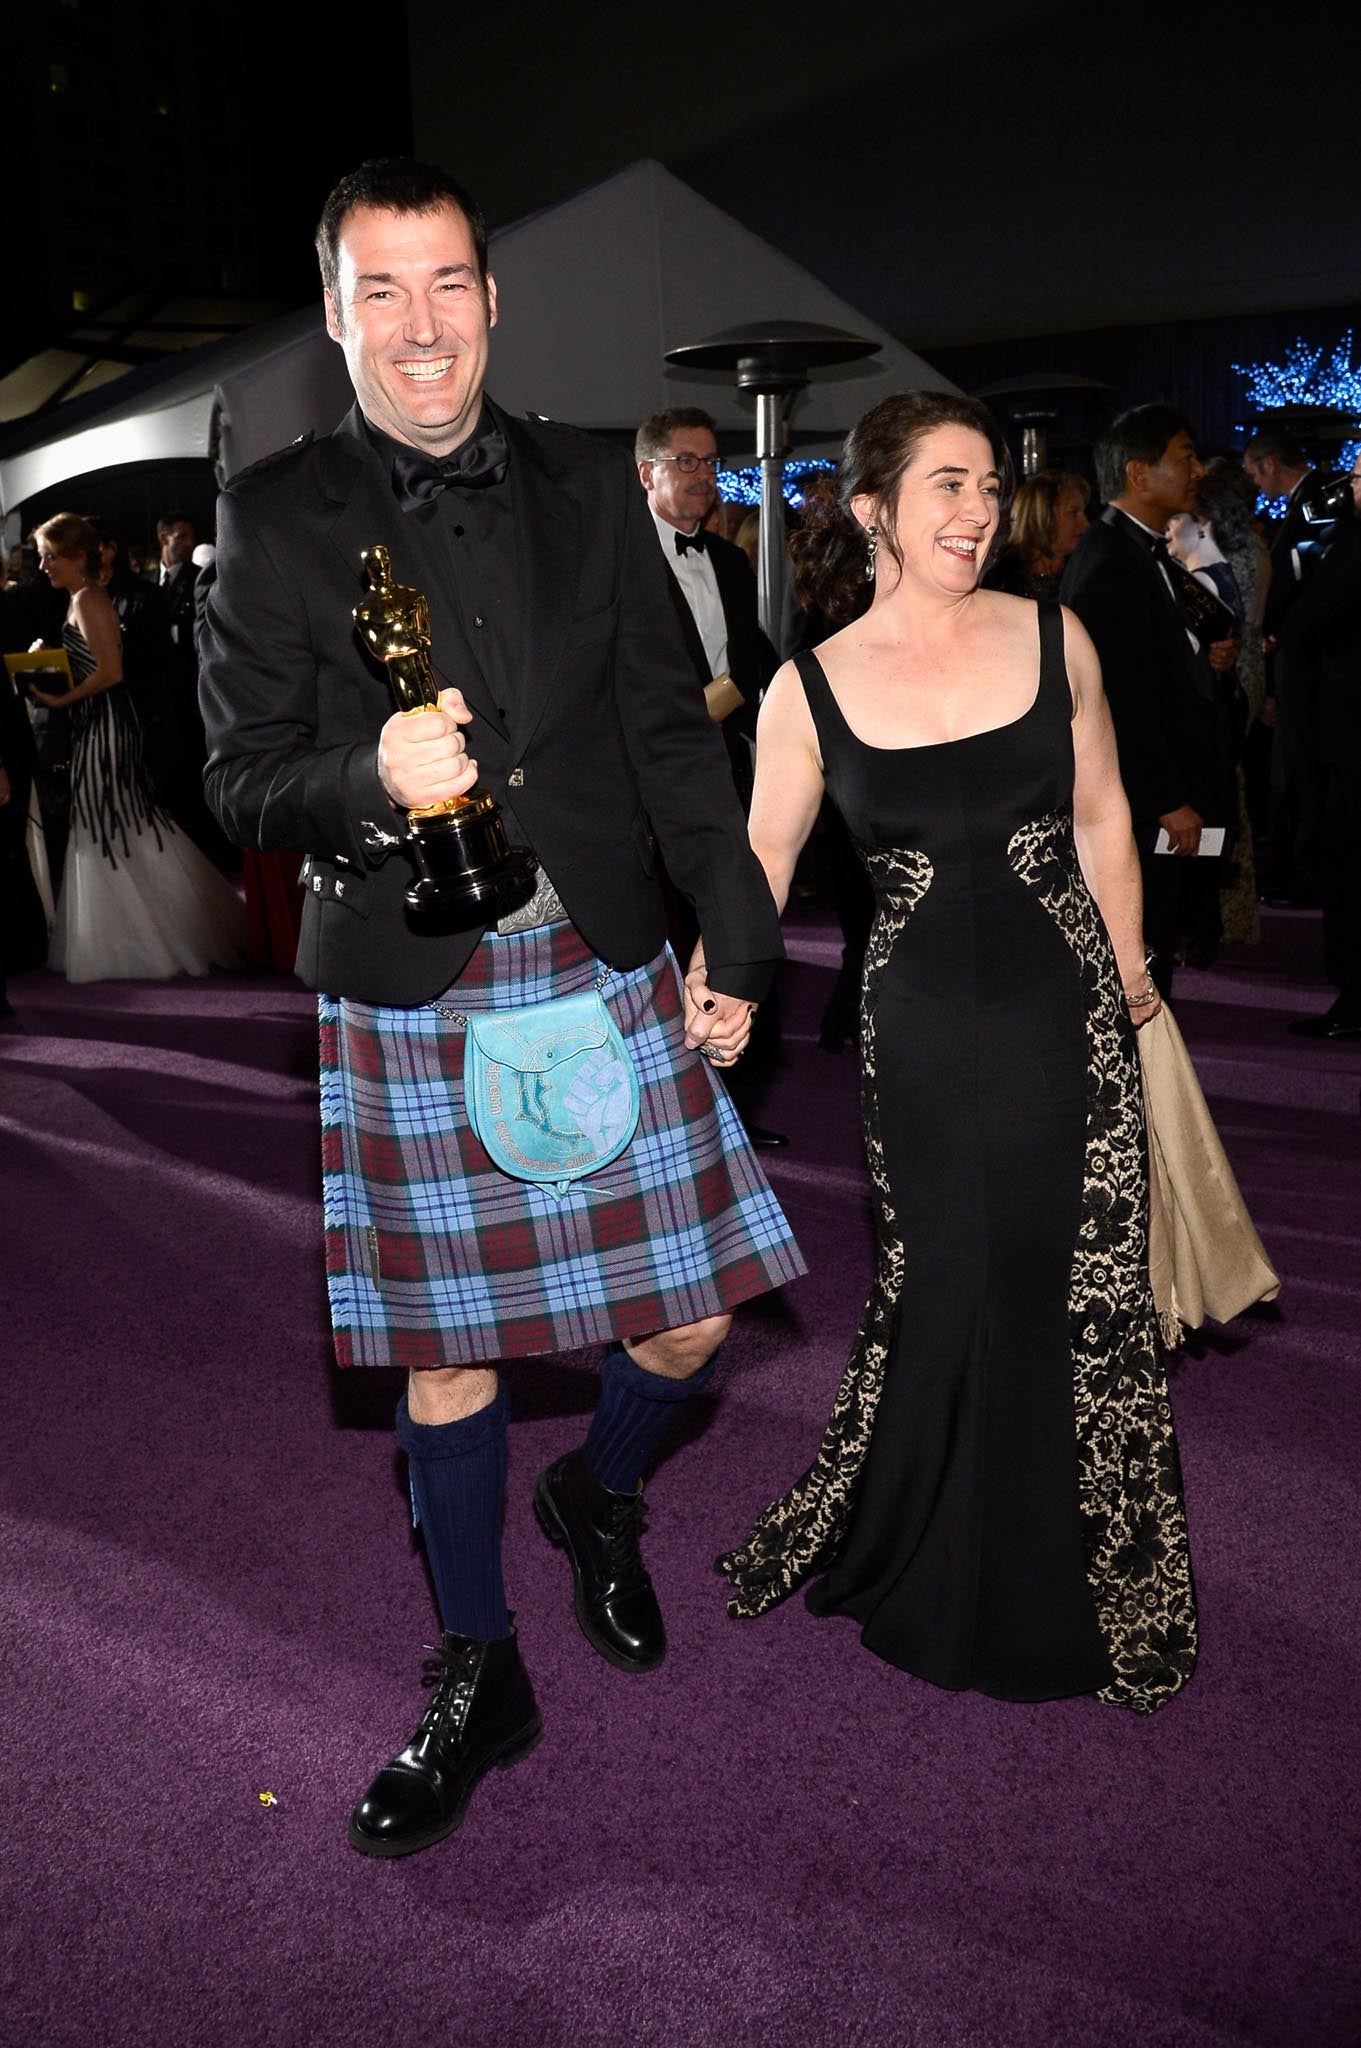 Directors Mark Andrews and Brenda Chapman, winners of the Best Animated Feature award for 'Brave,' attend the Oscars Governors Ball at Hollywood & Highland Center on February 24, 2013 in Hollywood